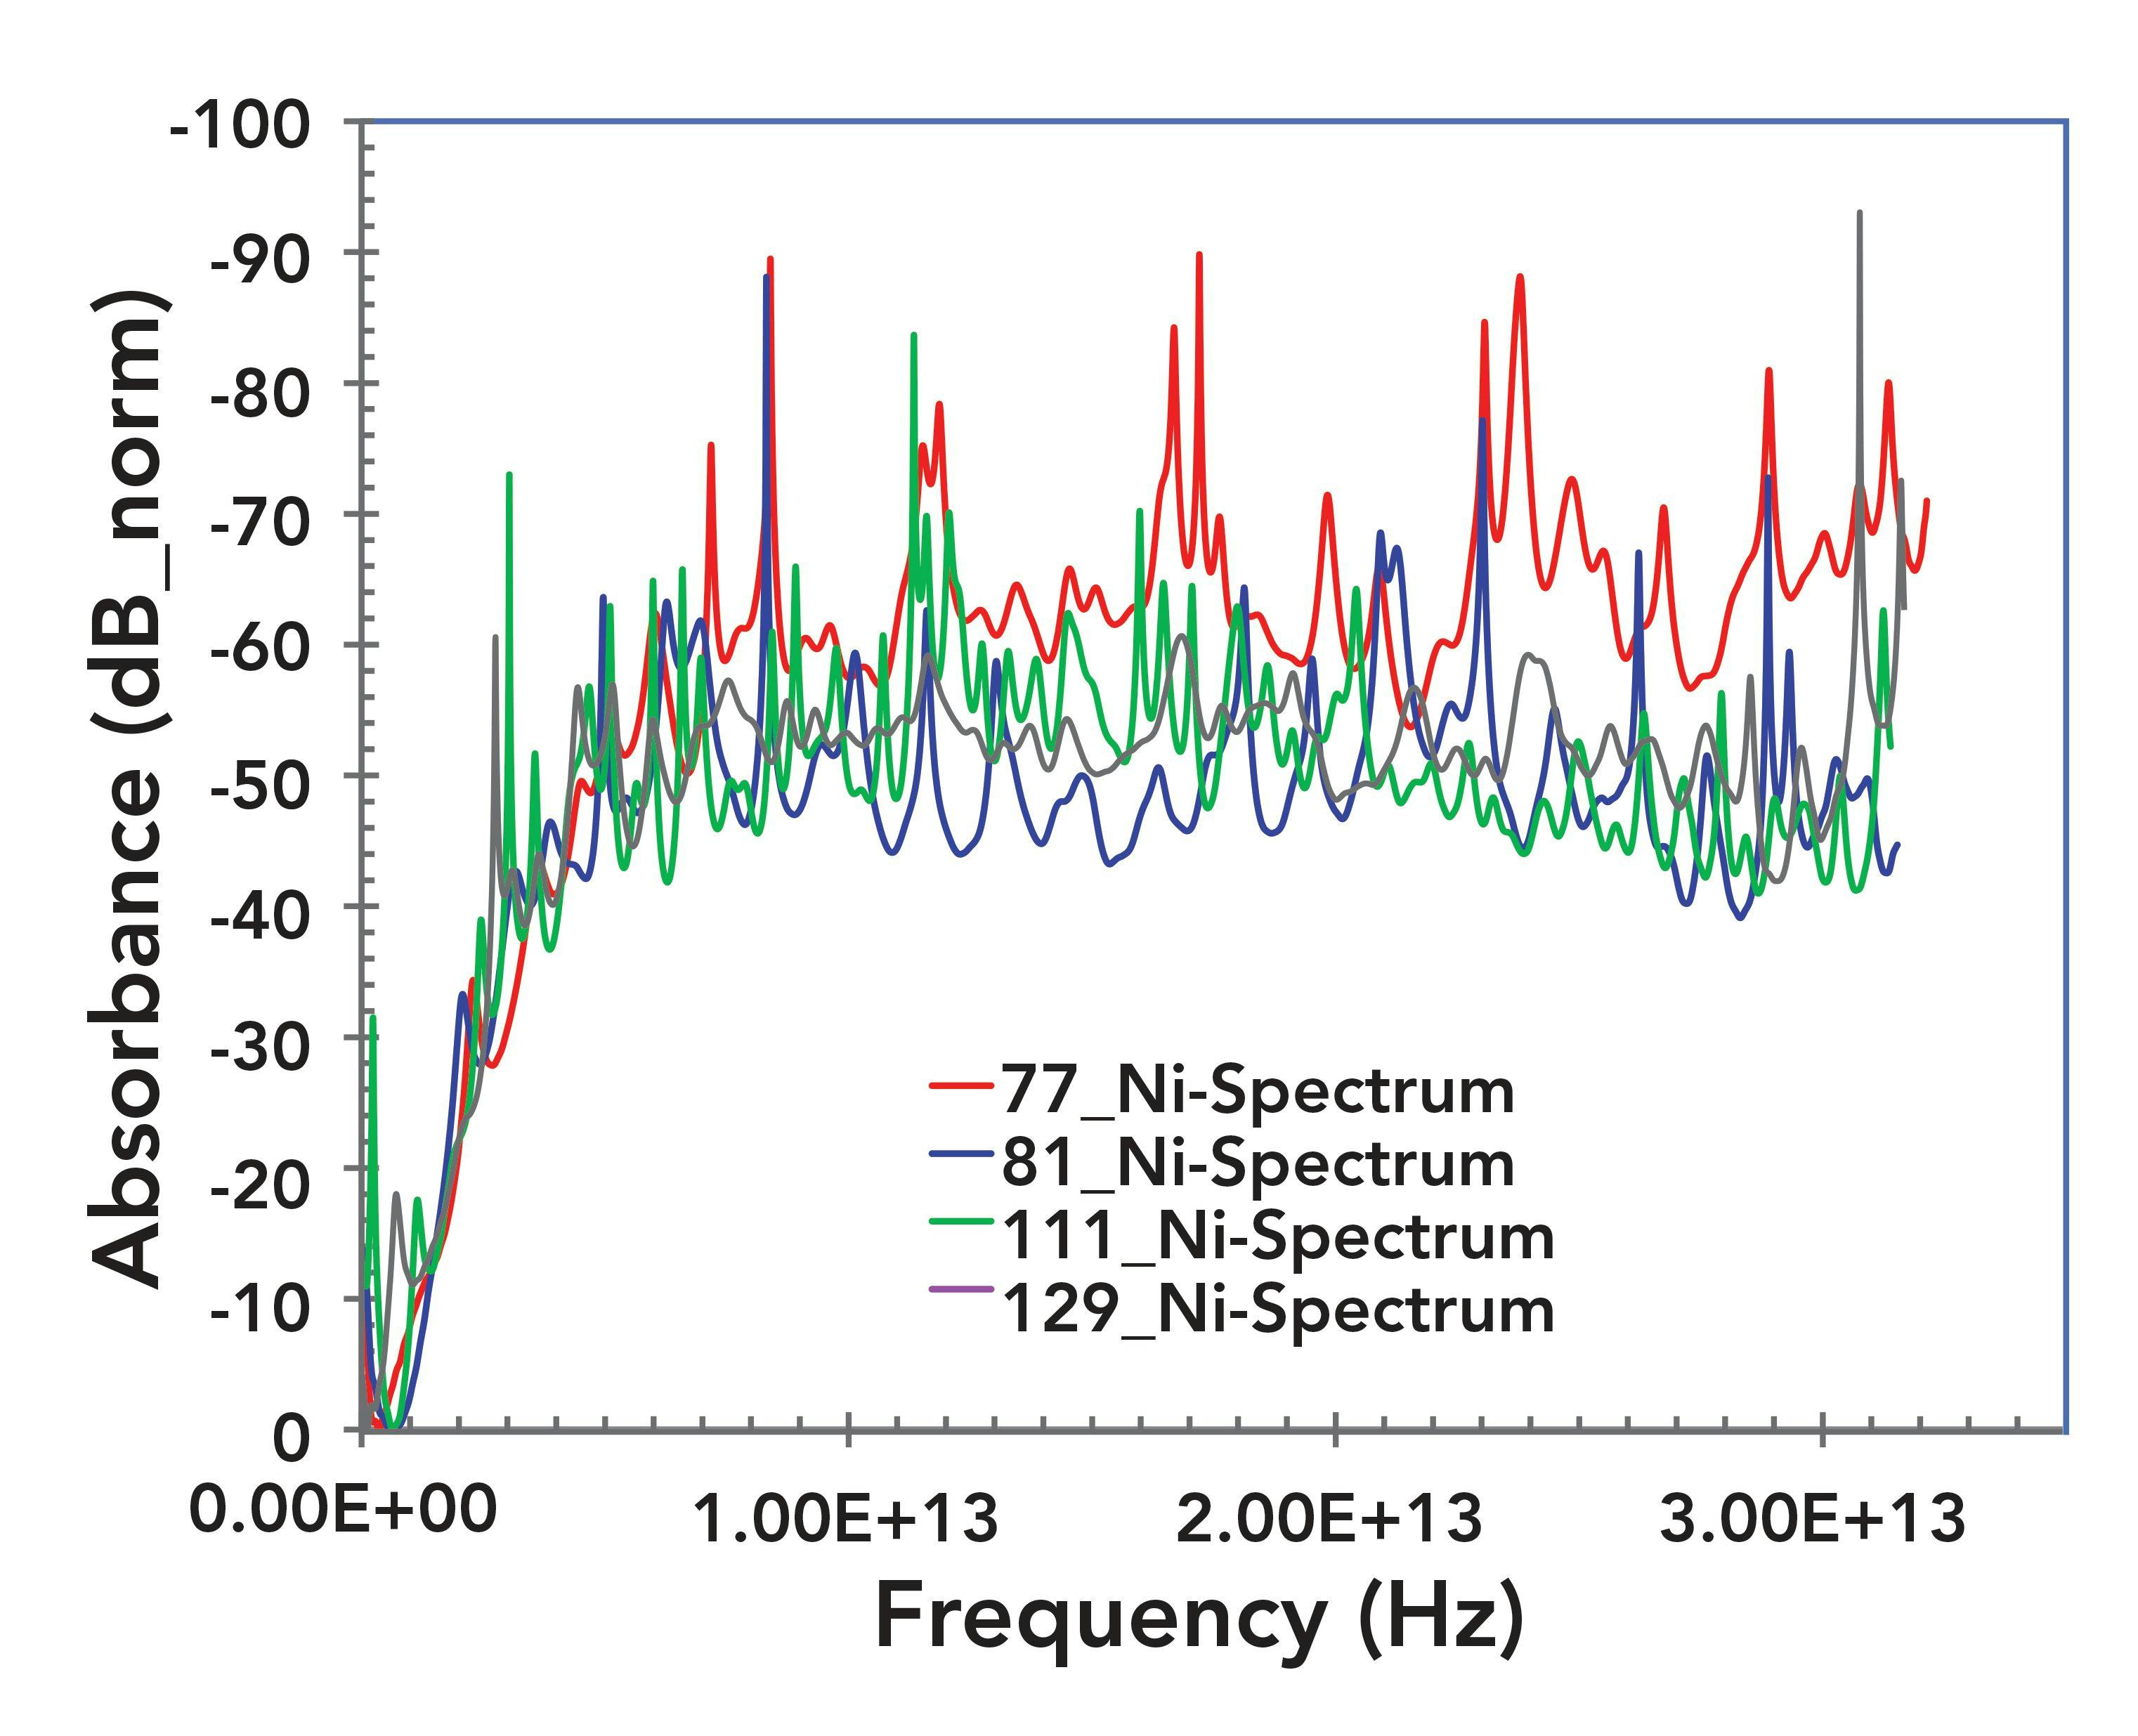 FIGURE 5: Frequency domain absorbance spectra of all four samples corresponding to the nickel rich area. This gives a broader view of the spectra over 0.1 to ~32 THz. Many distinct absorbance peaks visible for all samples. These peaks are further analyzed in Figure 6.